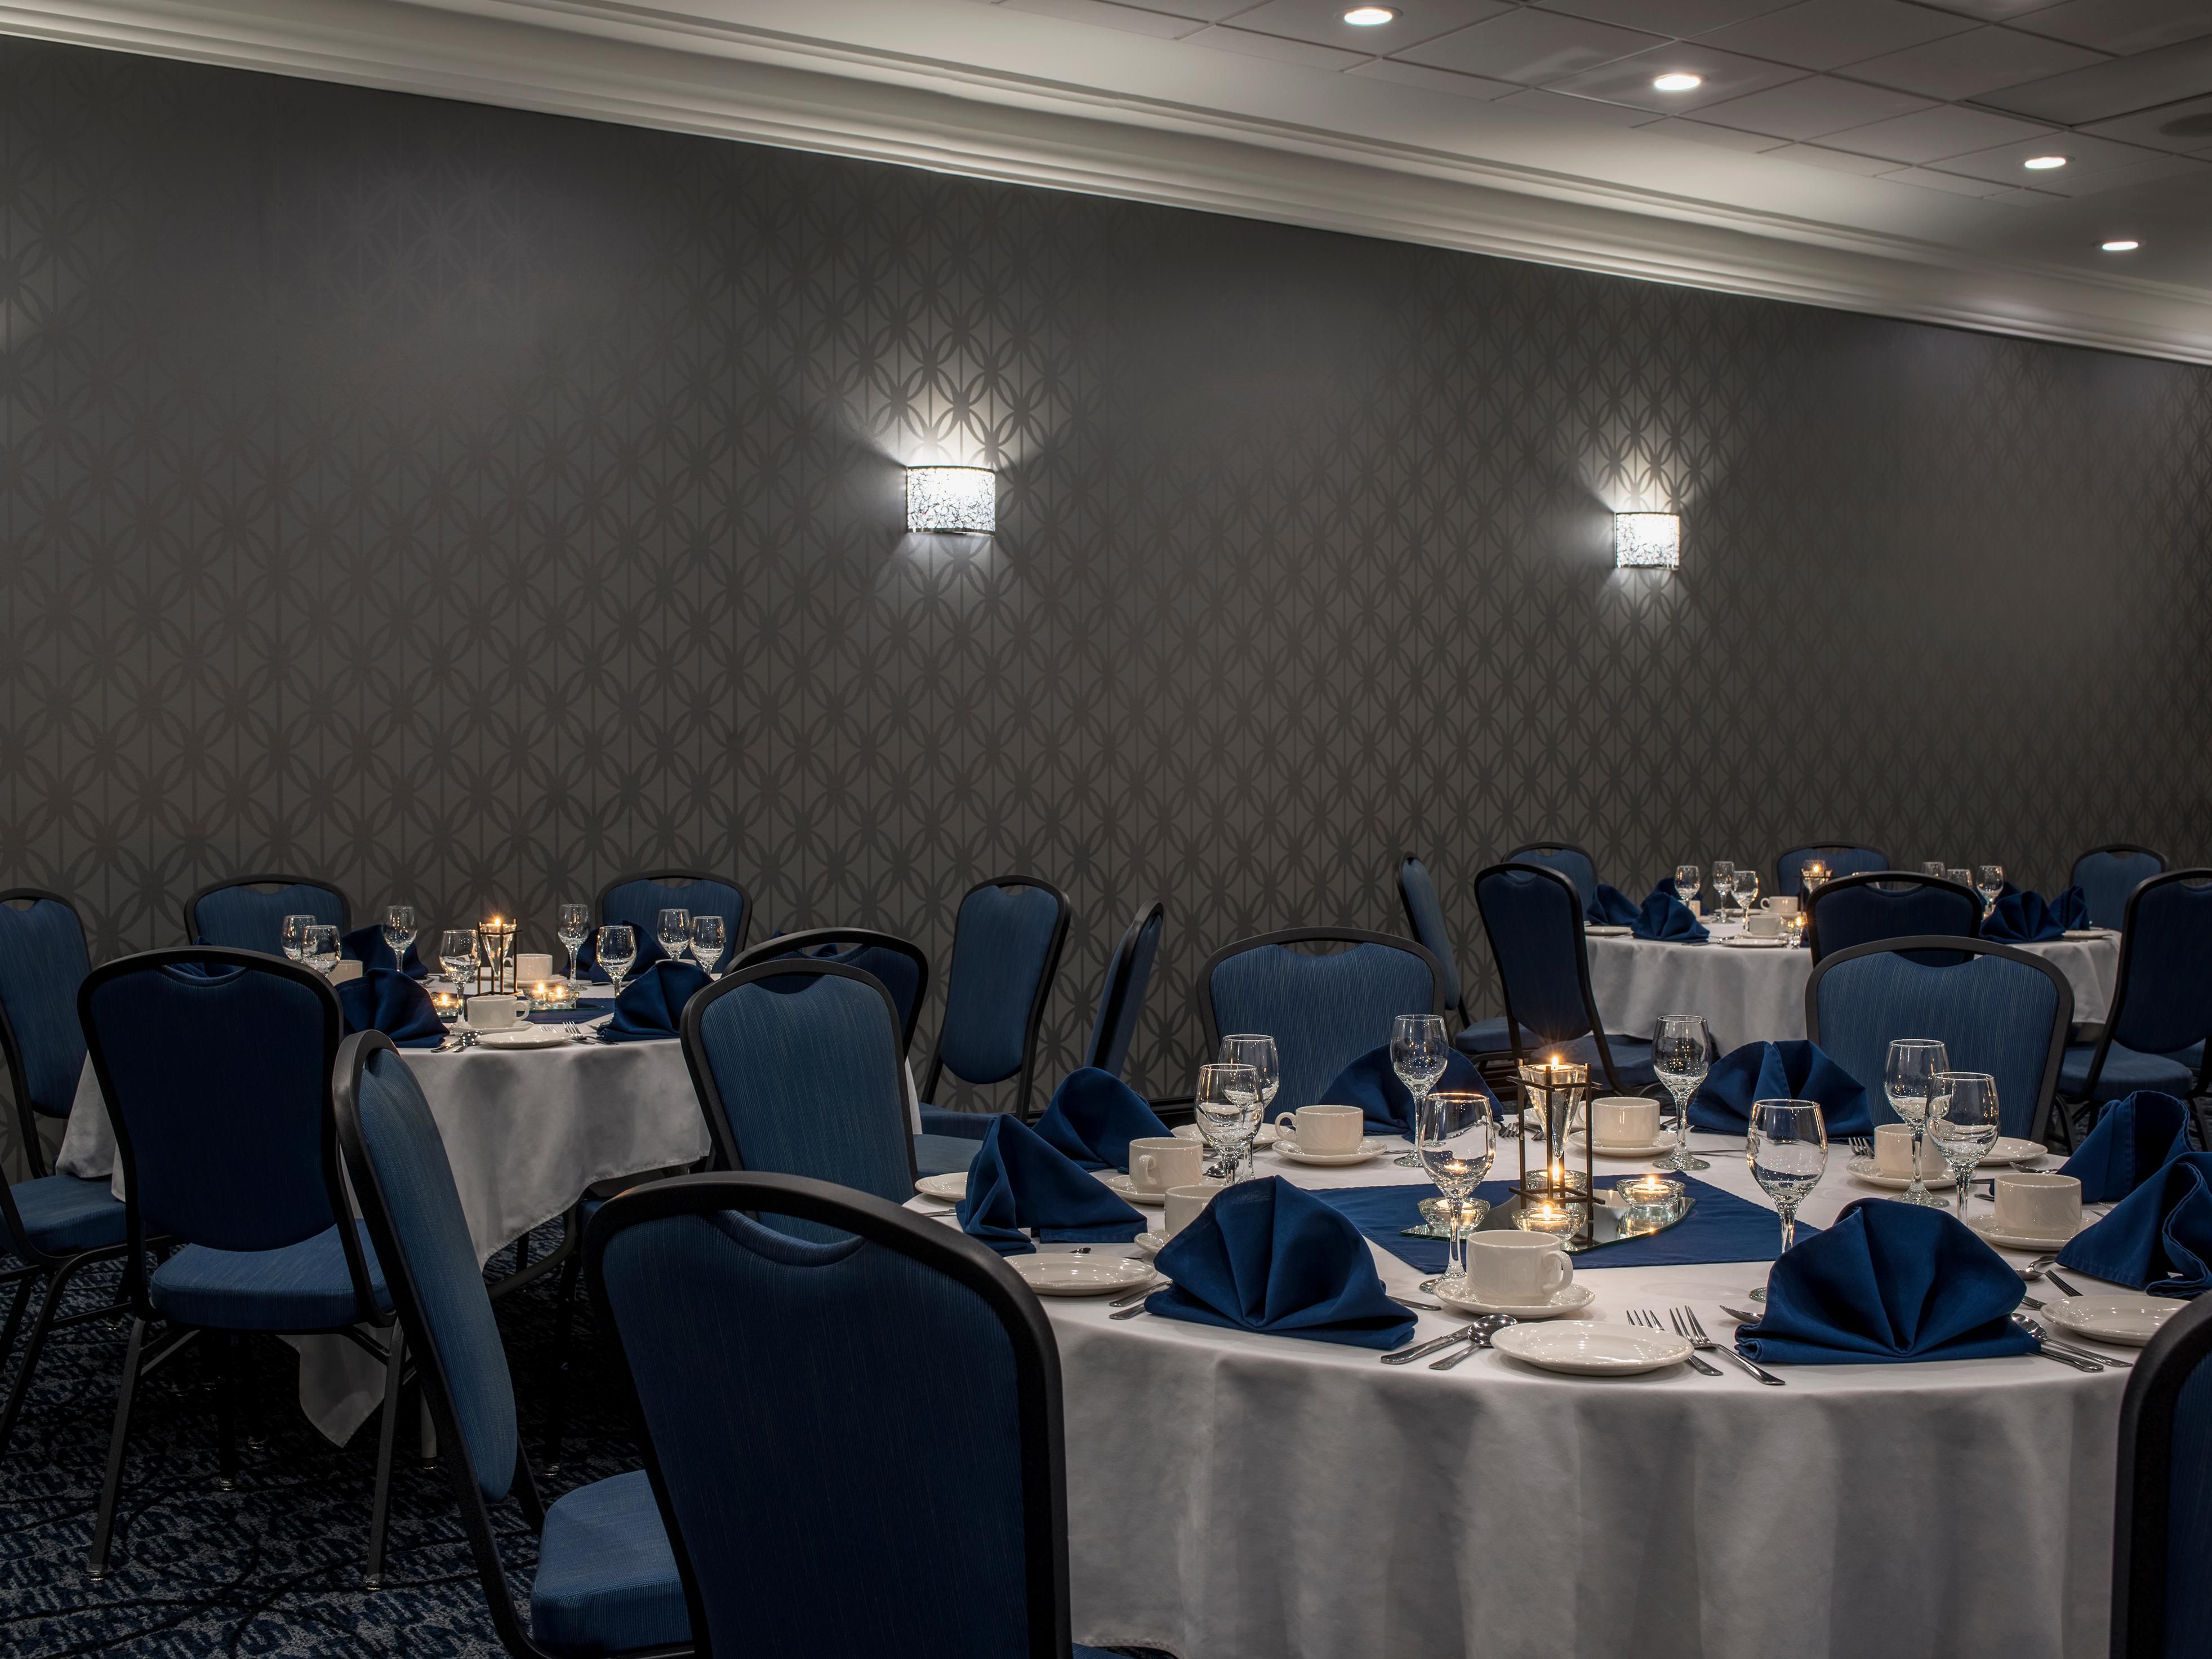 With nine spacious conference rooms, we have everything you need including catering and A/V services for up to 300 guests. All 8,000 sq. ft. is open concept and barrier-free. Our team is ready to deliver creative and inviting solutions to fit your next meeting or special event needs. 